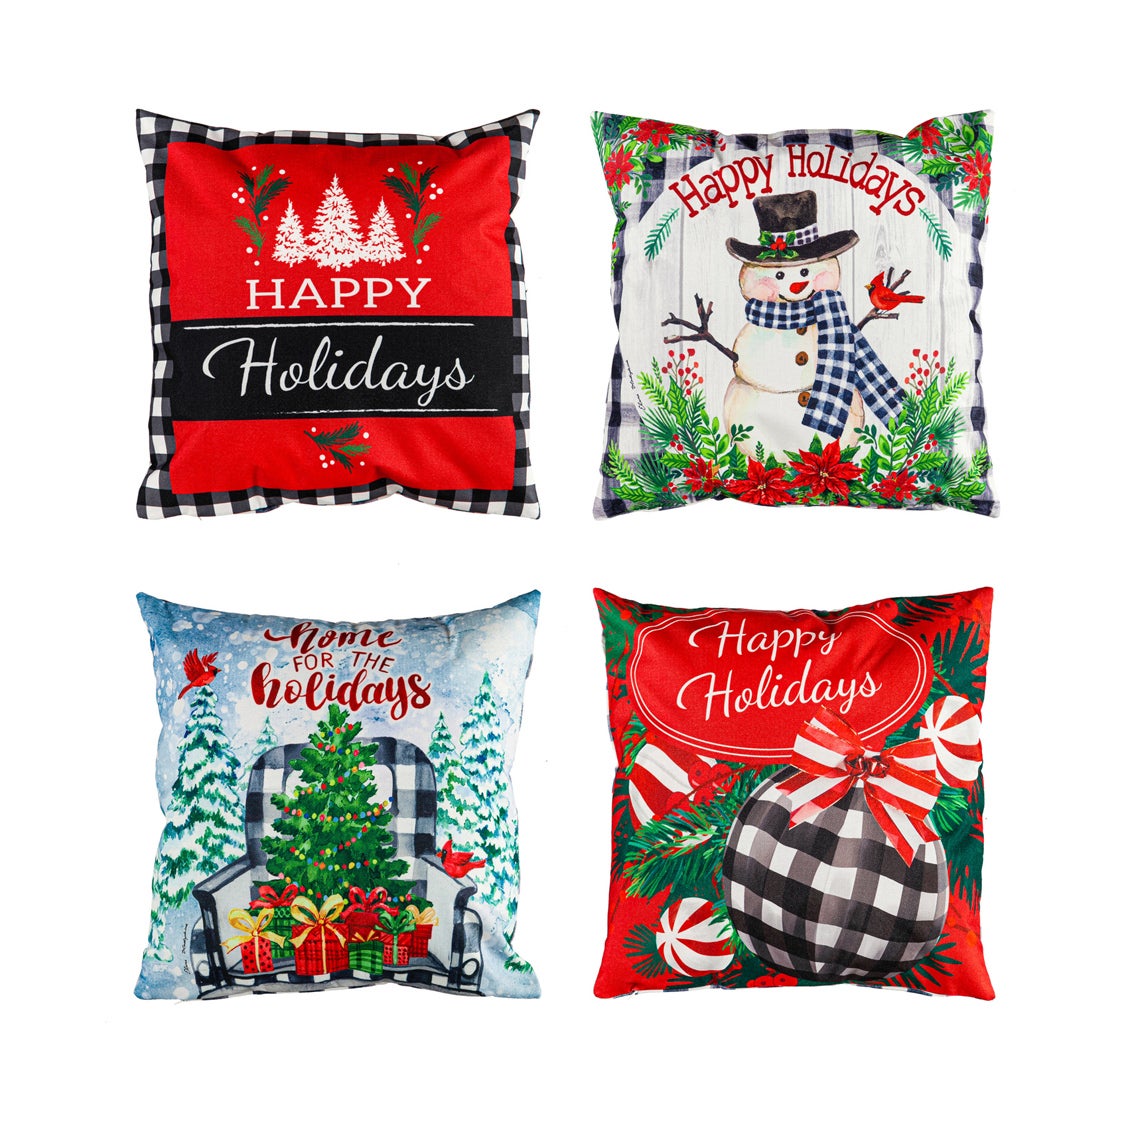 Happy Holidays Throw Pillow Covers, Set of 4